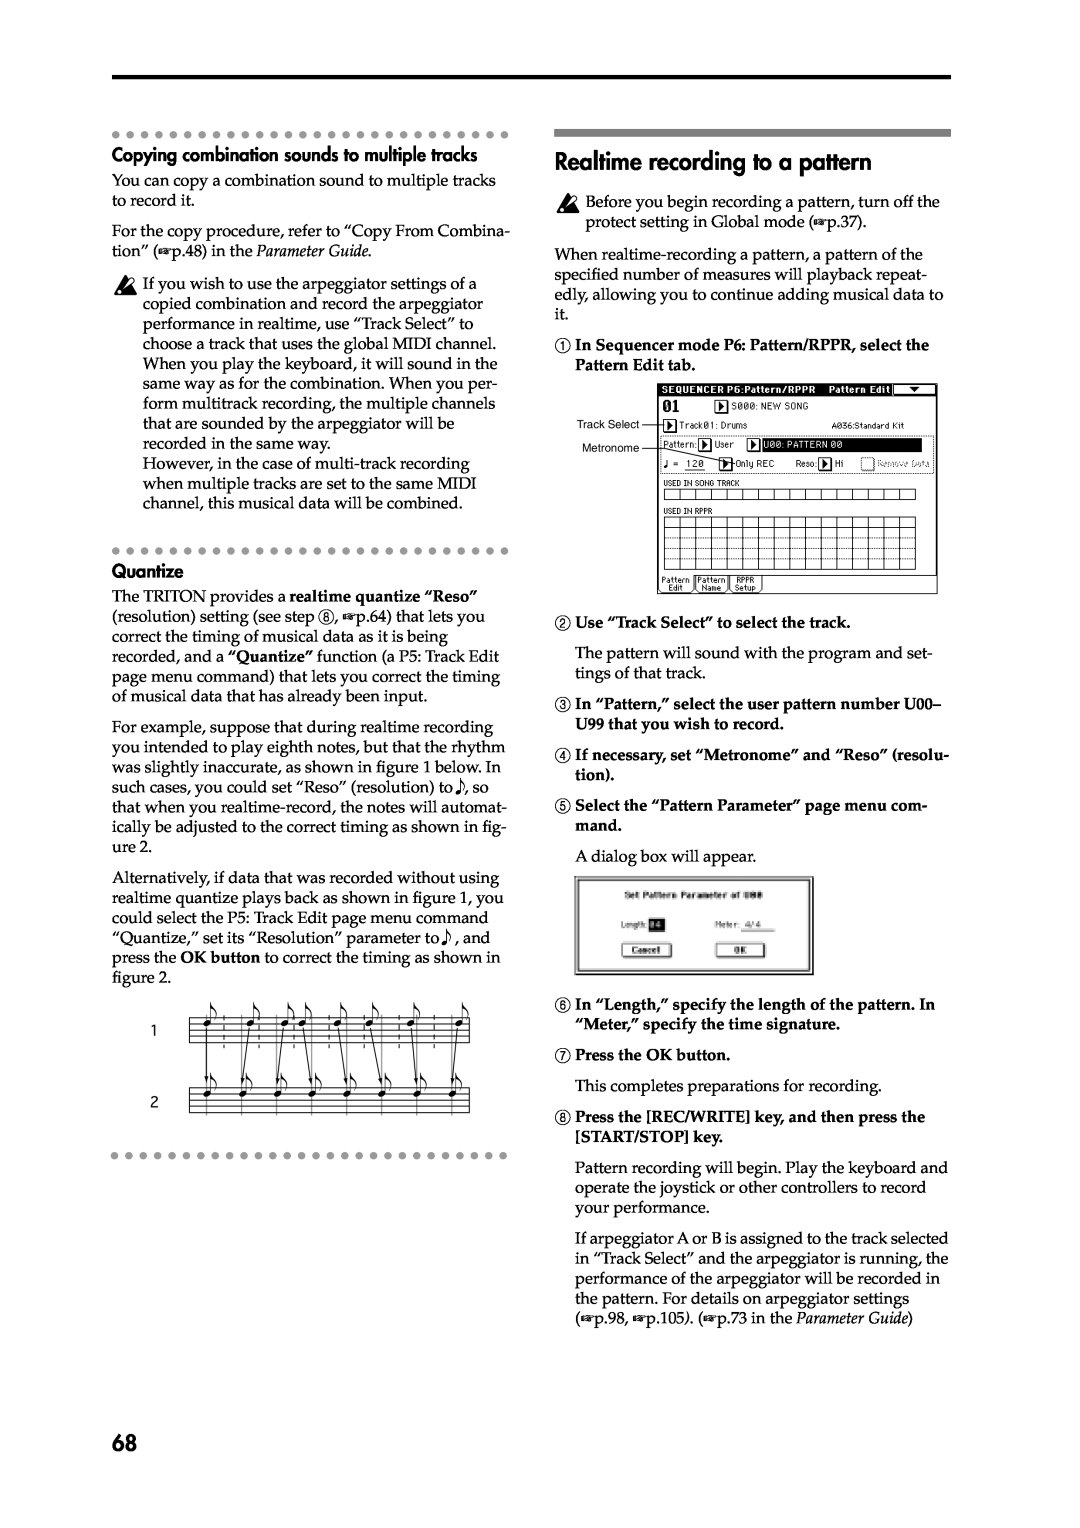 Korg Speaker System owner manual Realtime recording to a pattern, Copying combination sounds to multiple tracks, Quantize 